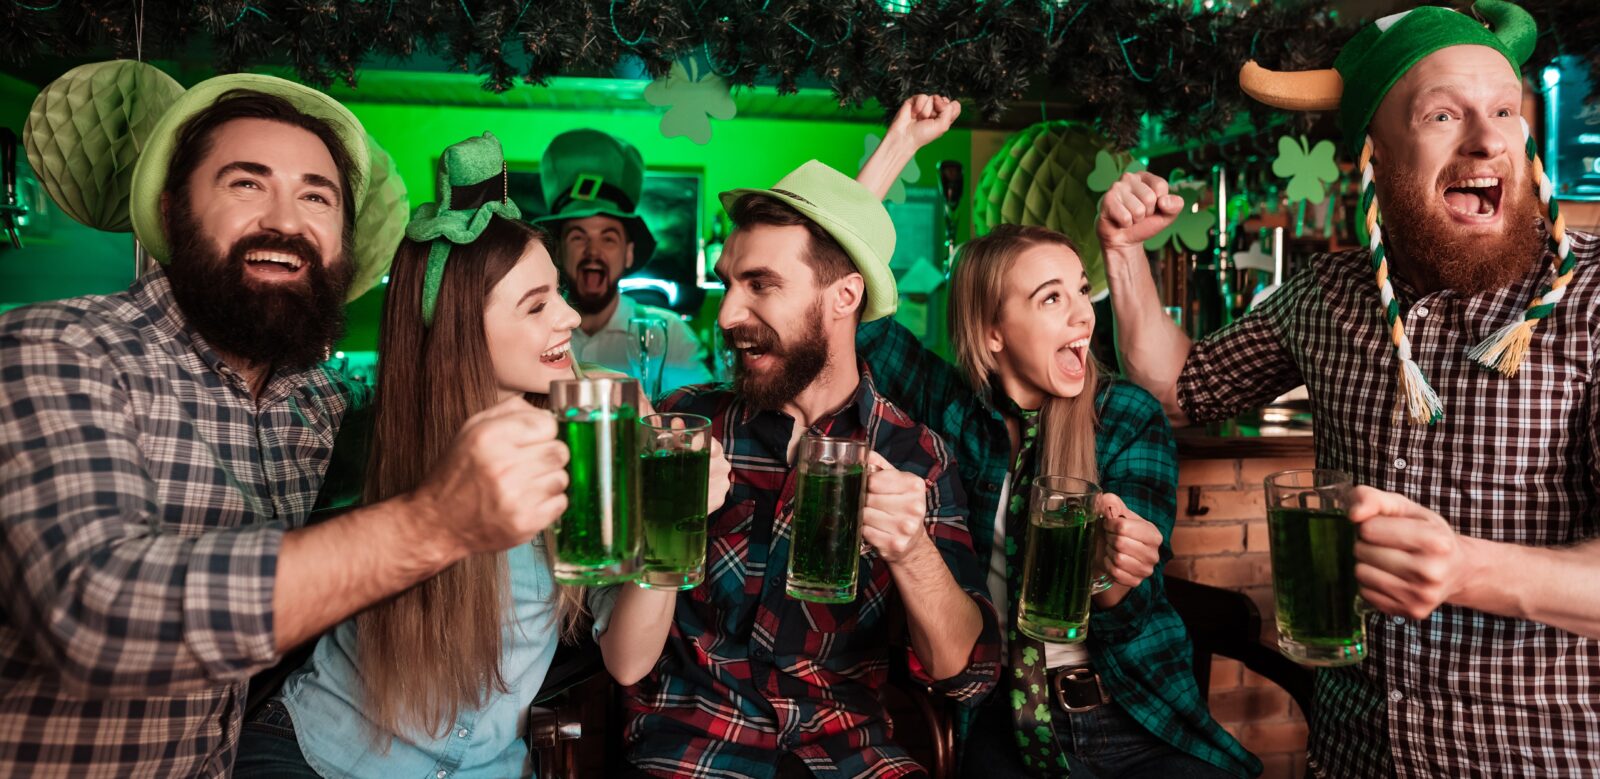 Do The Almost St. Patty’s Day Crawl in Chico!